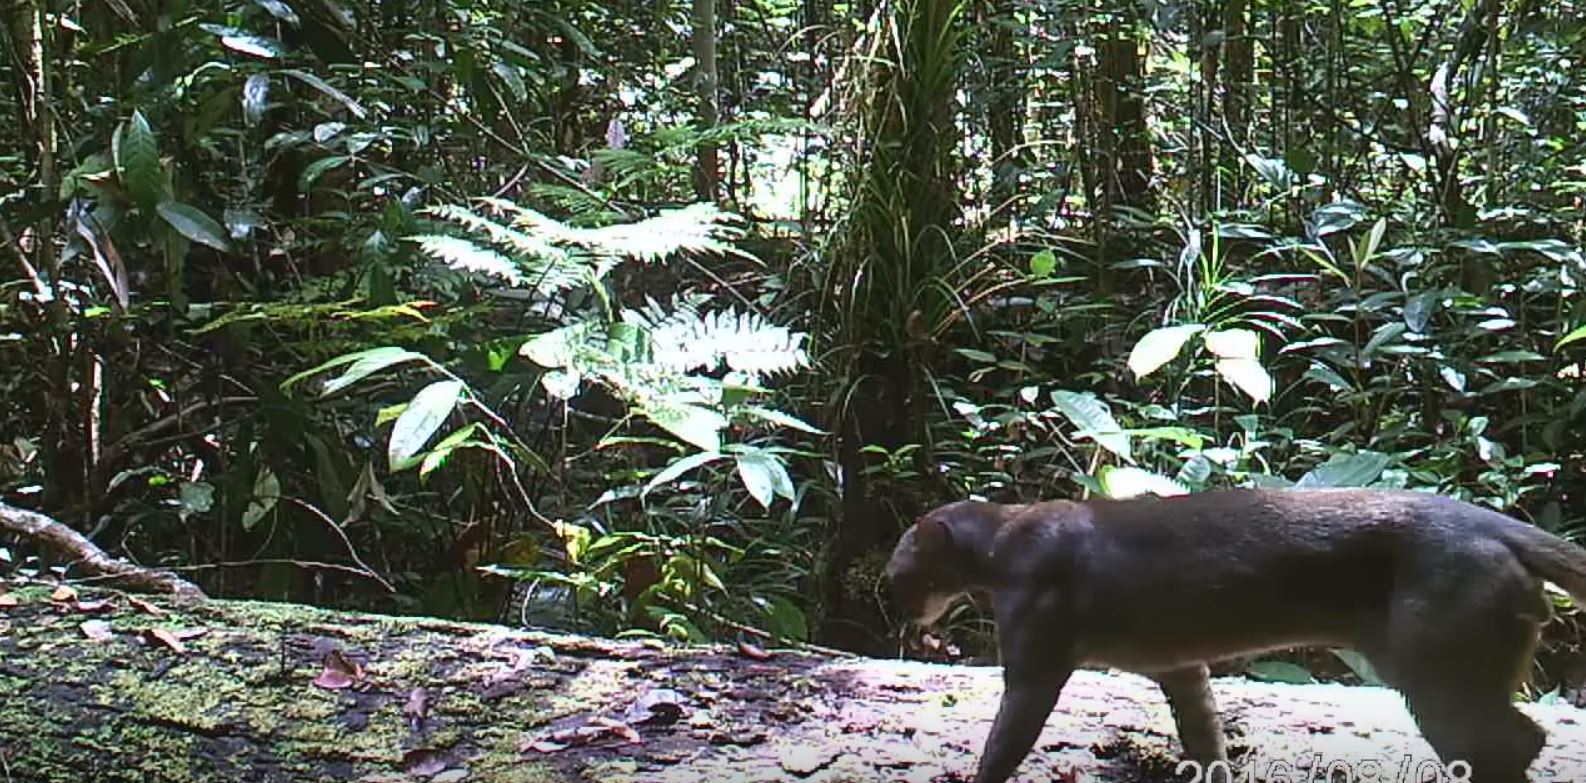 The Bay Cat: Jungle Creature That Eluded Scientists Finally Caught On Film